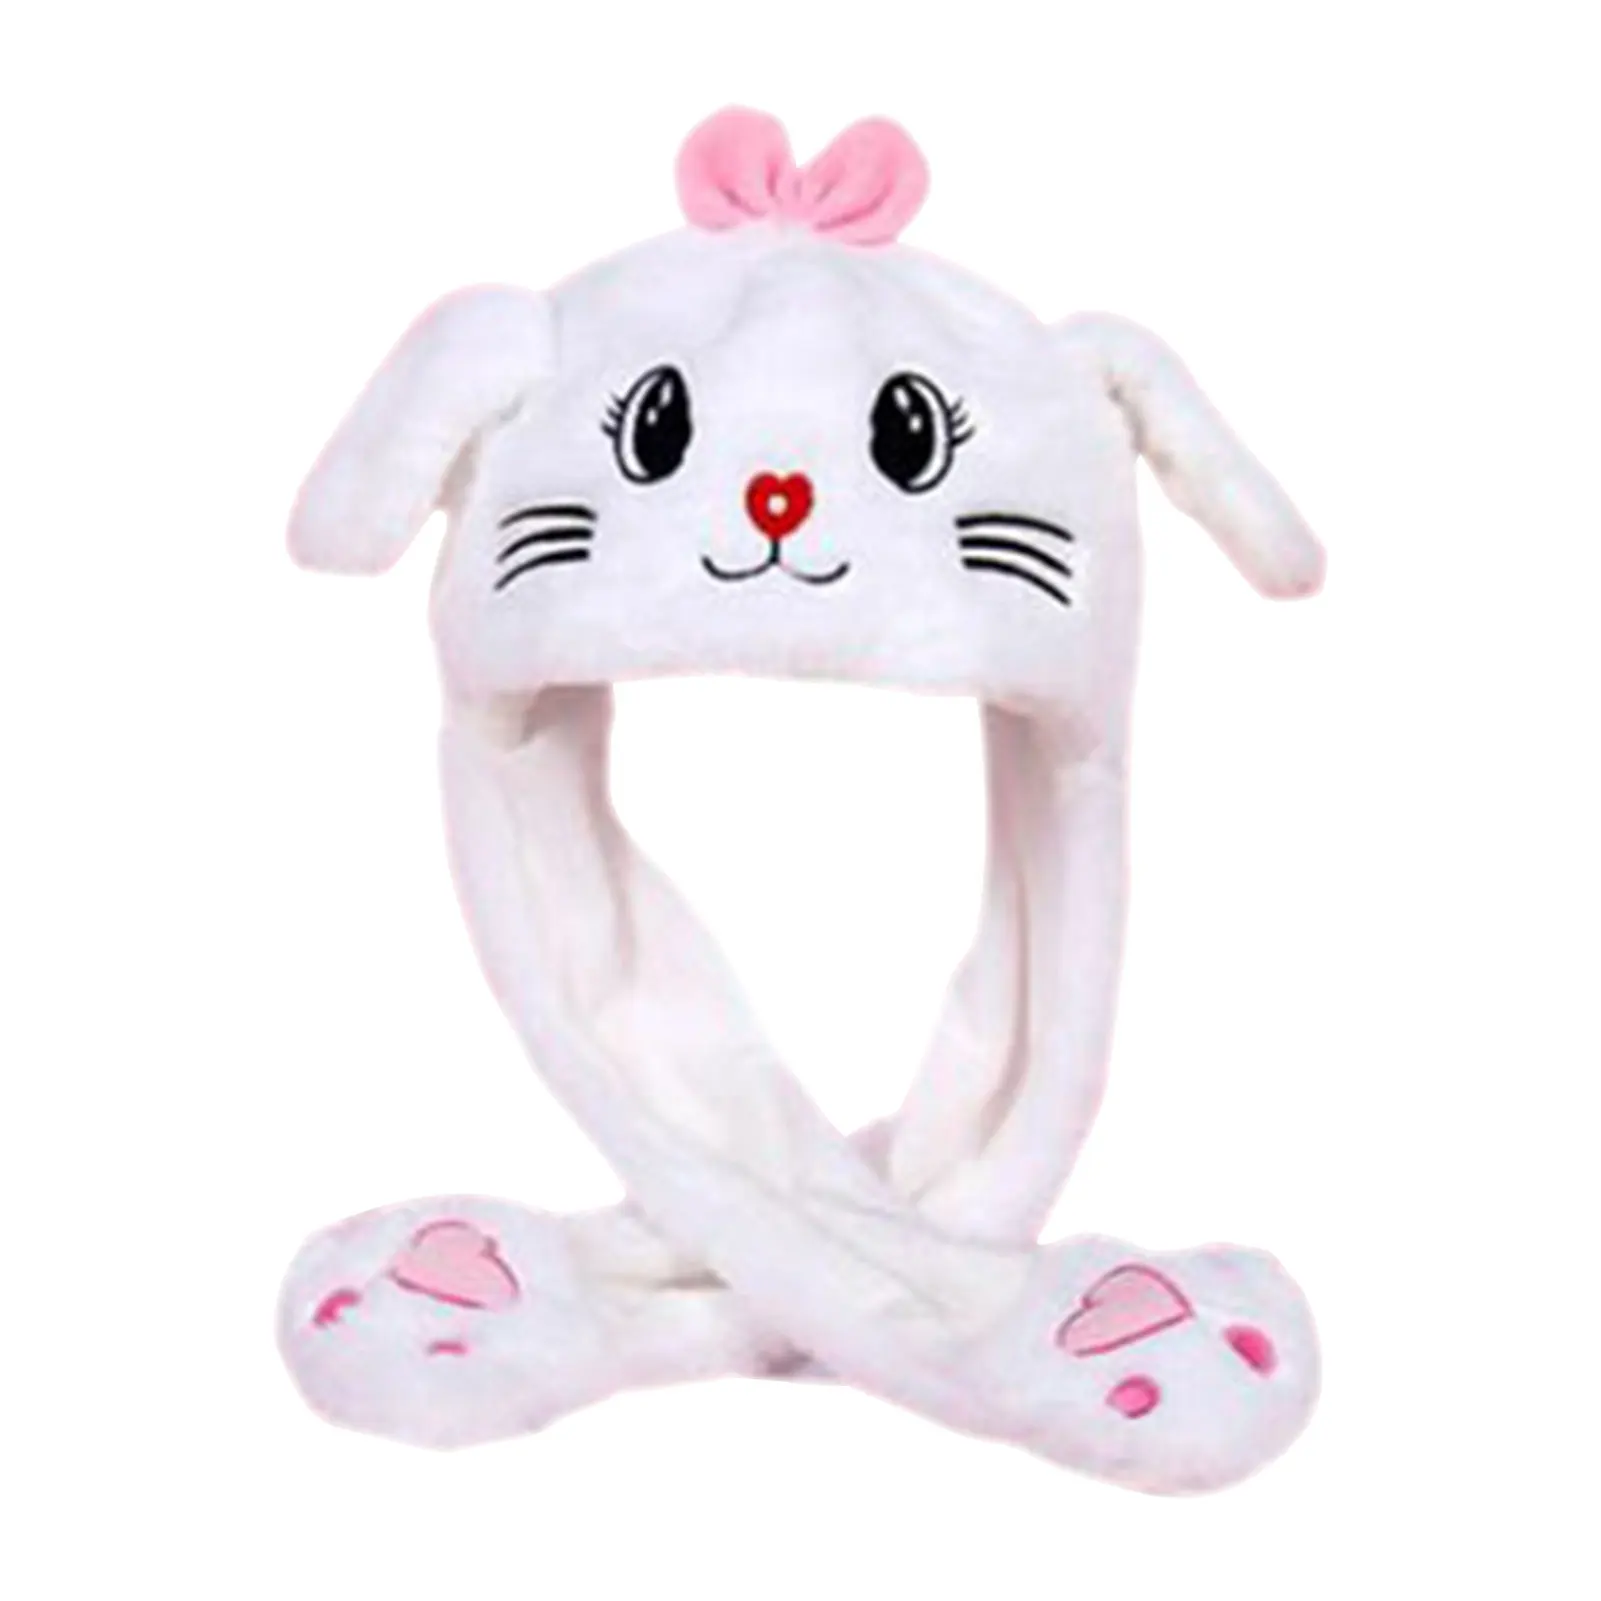 Lovely Moving Bunny Ears Hat Plush Rabbit Hat Funny Play Toy Up Down Moving Bunny Ears Toy Hat Girlfriend Children Girls Gifts cute bunny headband ears moving hair funny airbag rabbit fluffy hoop party plush toy girls jumping up headband gift for kids